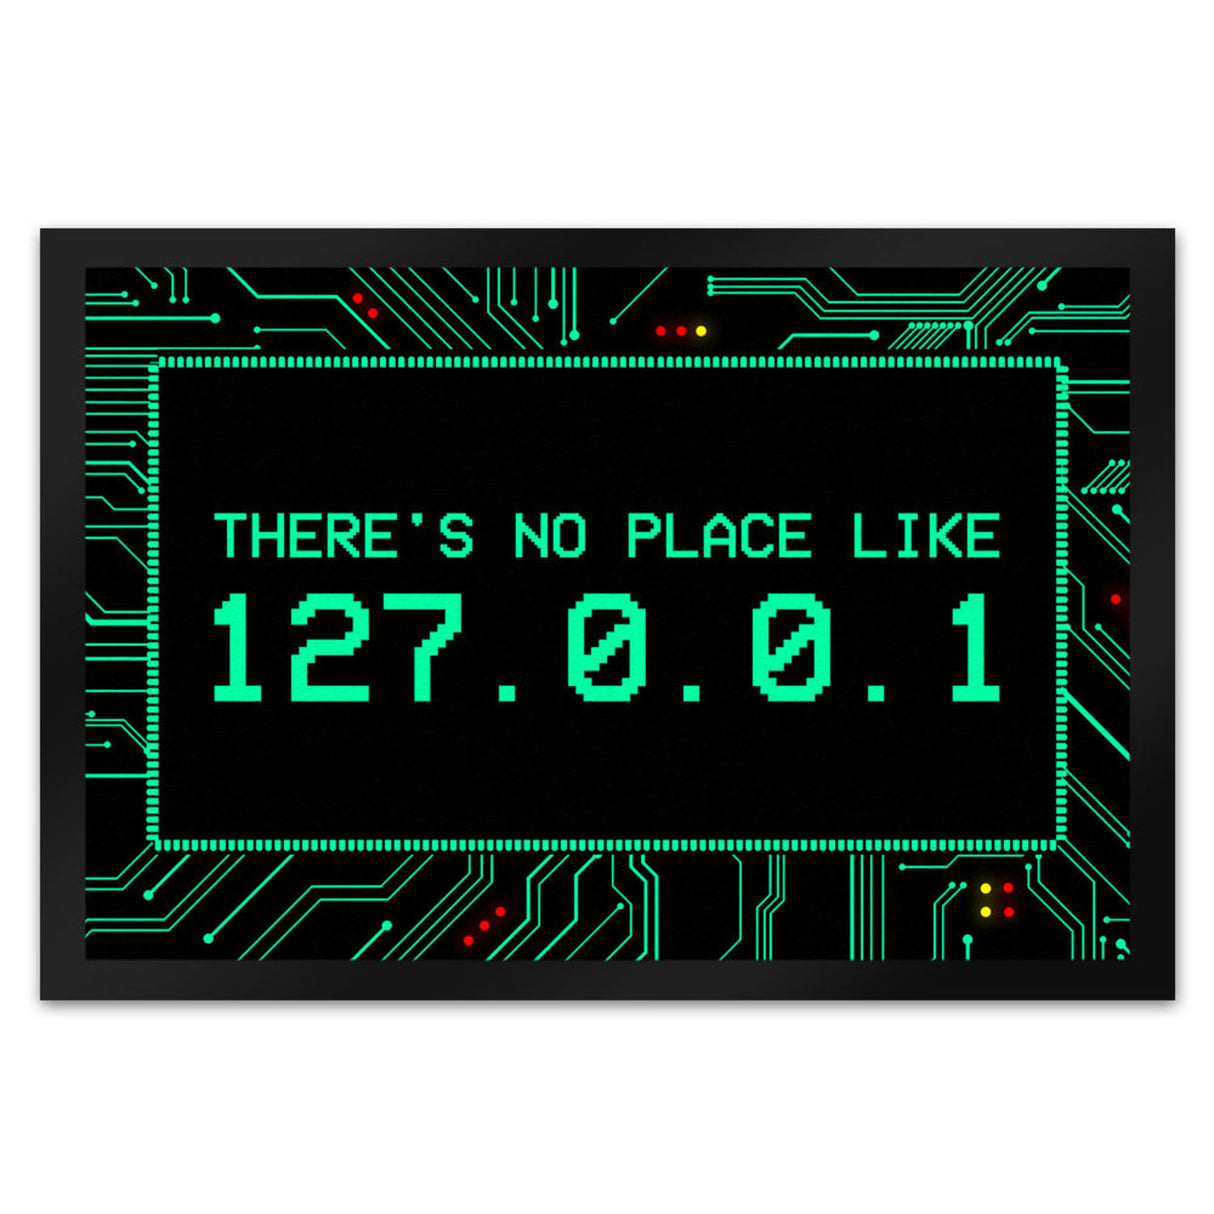 There's no place like 127.0.0.1 Localhost Fußmatte mit IP Adresse